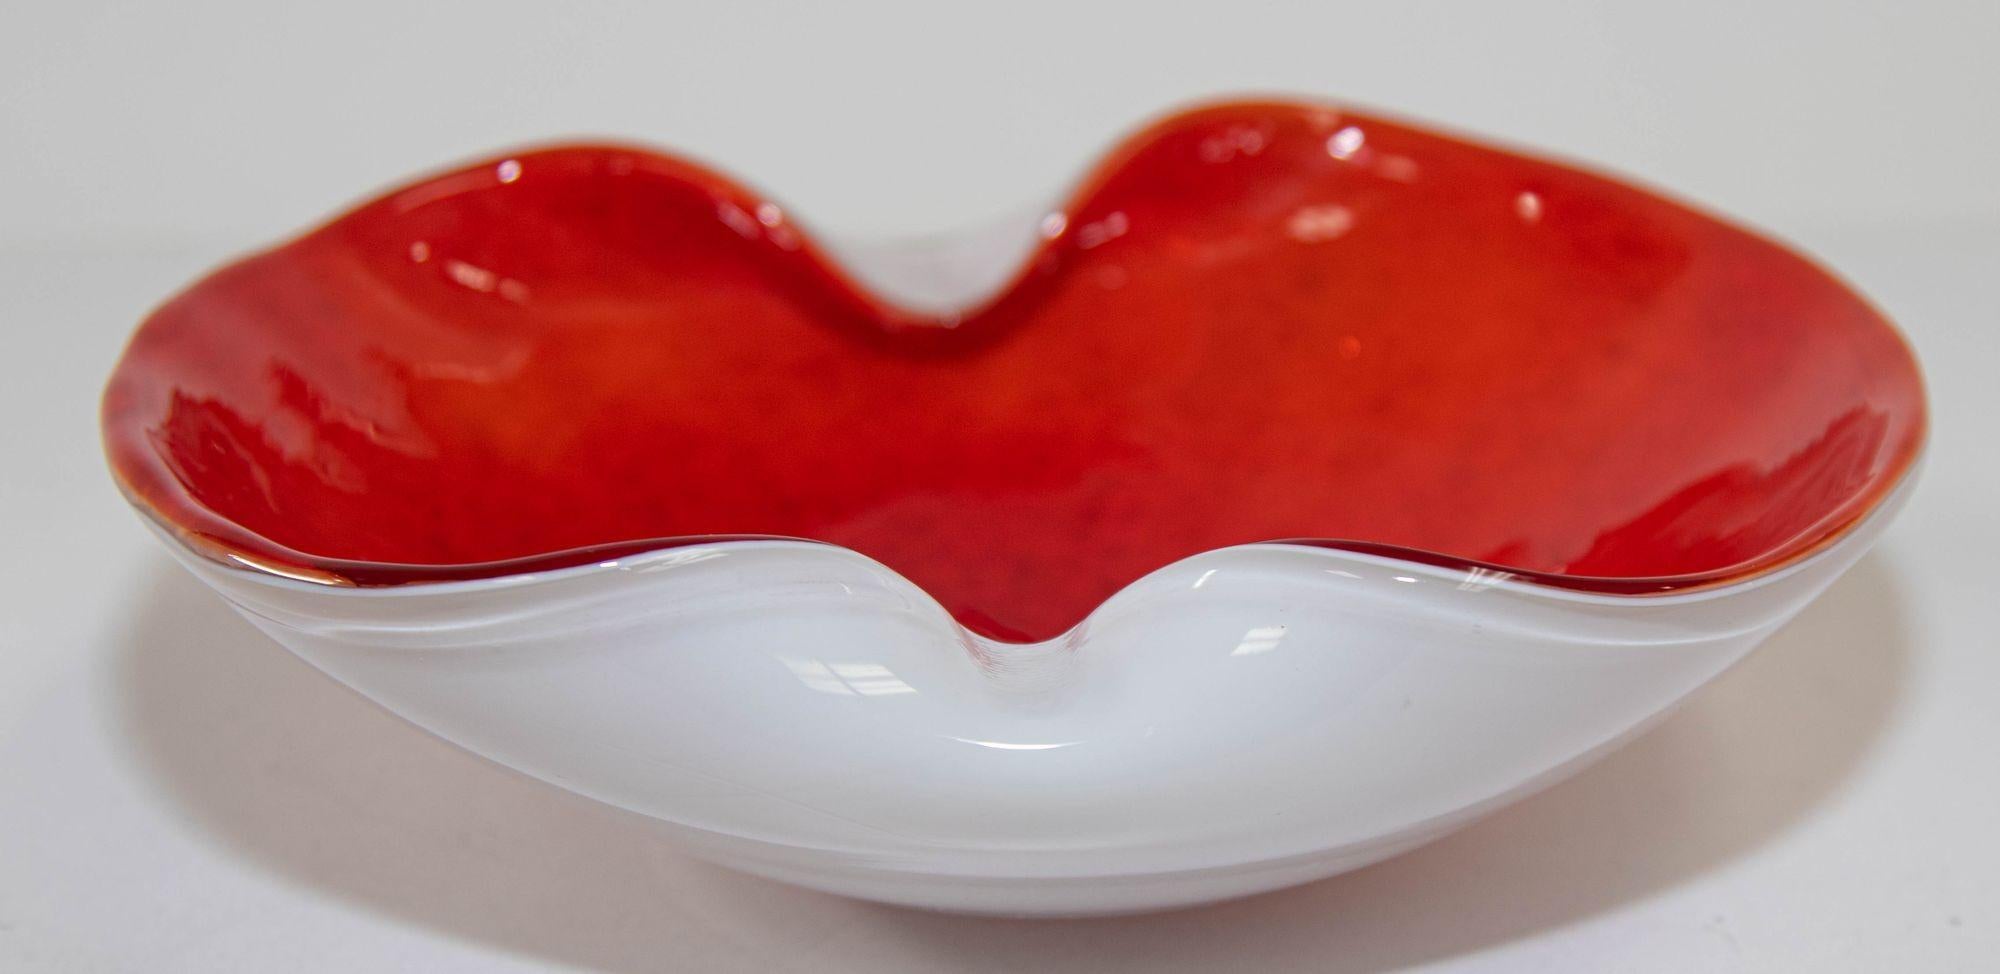 Vintage Double Cased Red and White Venetian Murano ARCHIMEDE SEGUSO Art Glass Ashtray Italy.
Vintage Cased Red and White Venetian Murano Seguso Art Glass Ashtray Italy 1960.
A beautiful large vintage Murano red glass cased ashtray or pinched glass